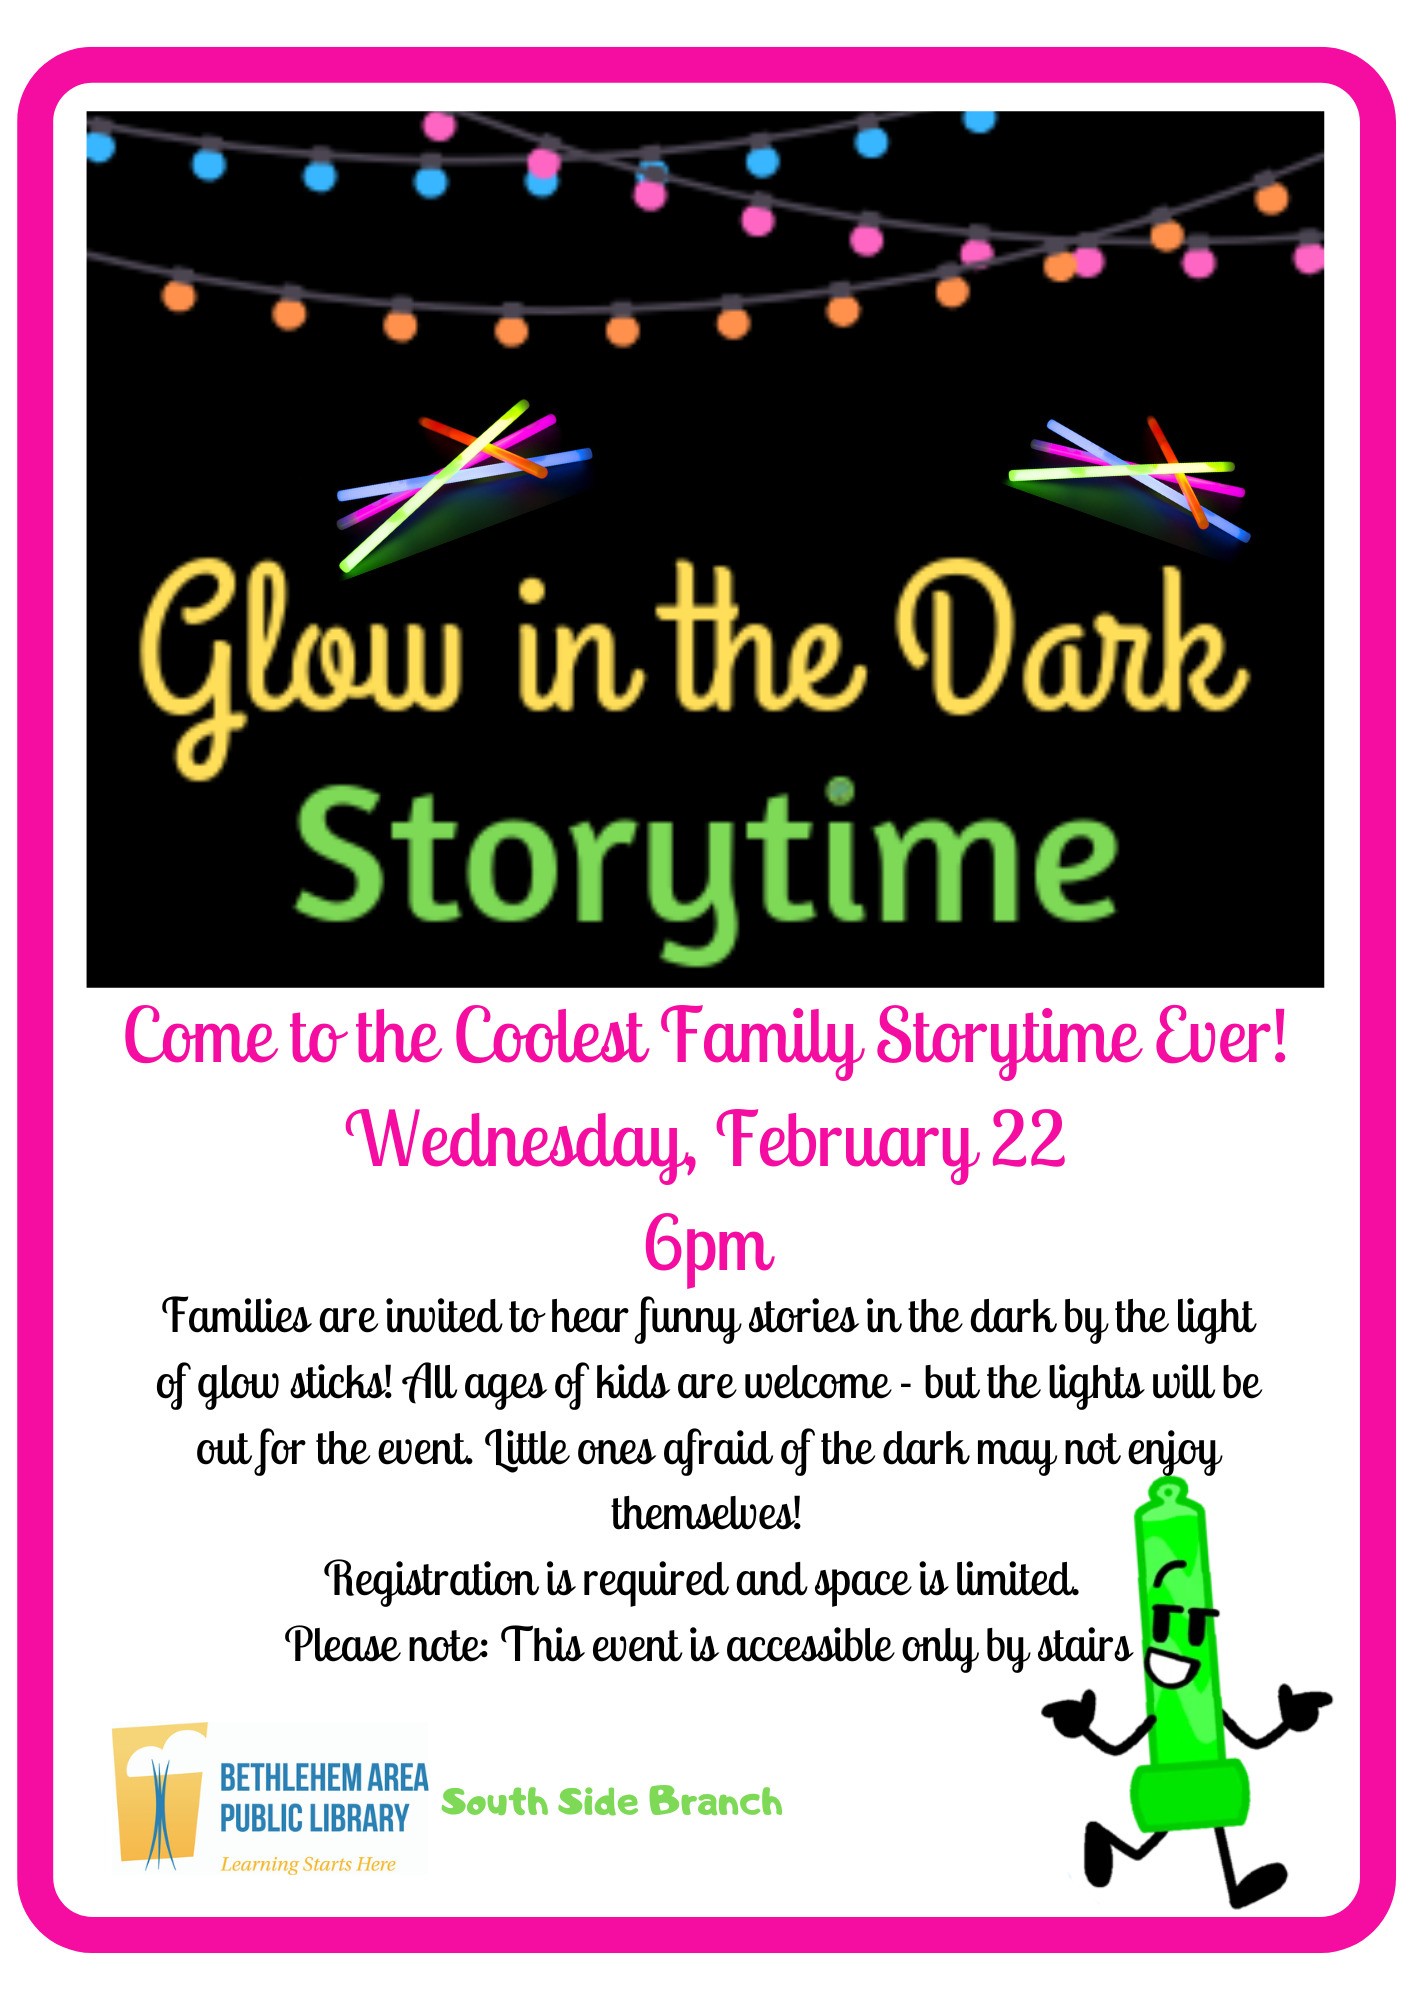 Join us for the coolest storytime!